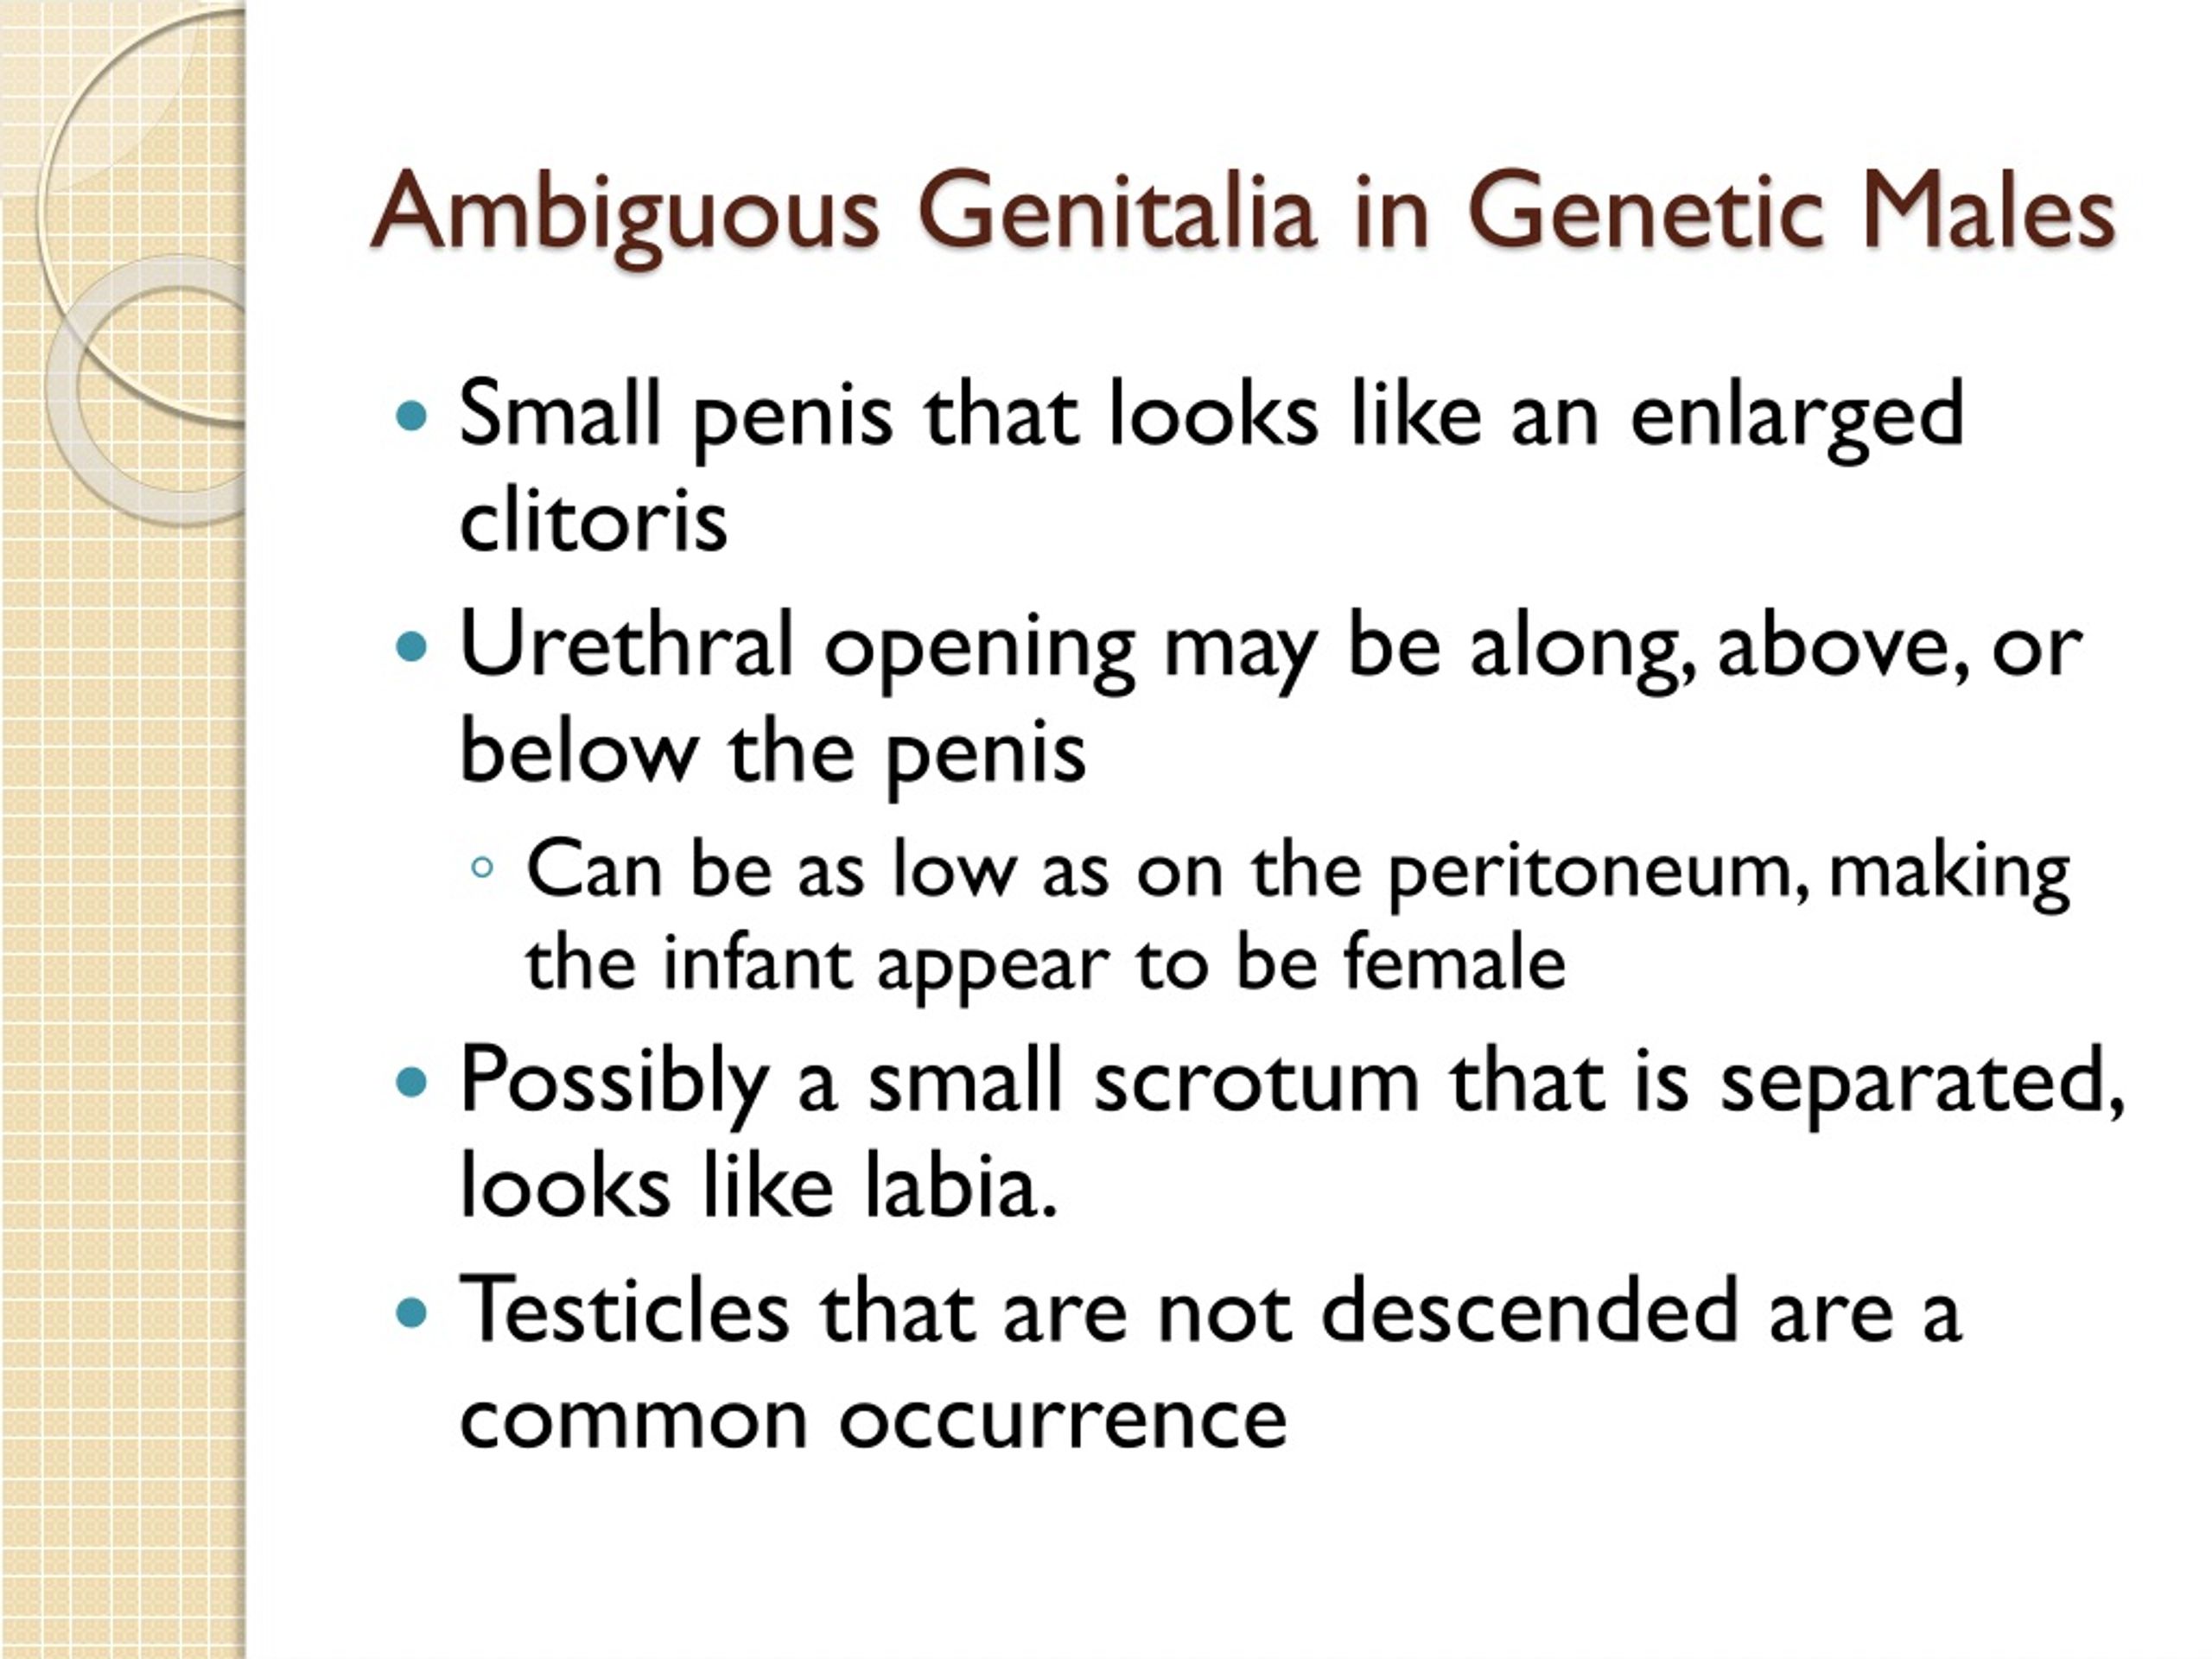 Ppt Ambiguous Genitalia Powerpoint Presentation Free Download Id8956753 0501